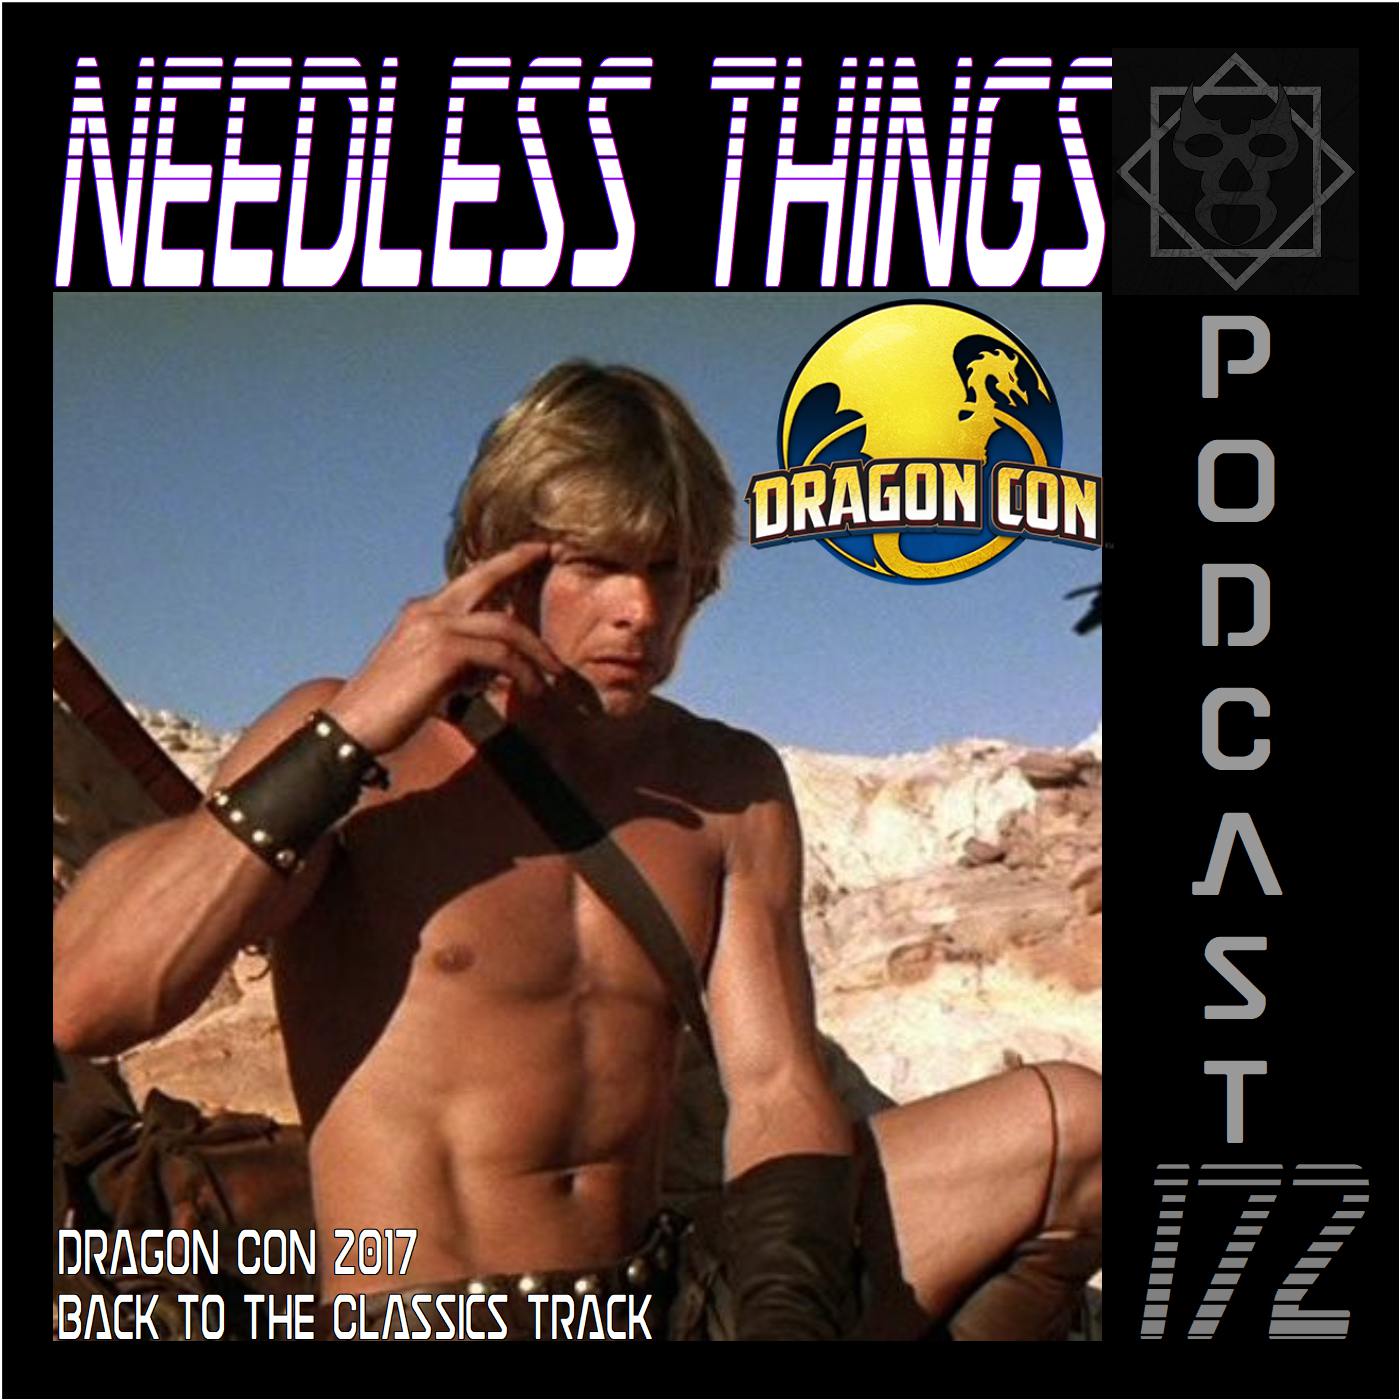 Needless Things Podcast 172 – Dragon Con 2017: Back to the Classics Track